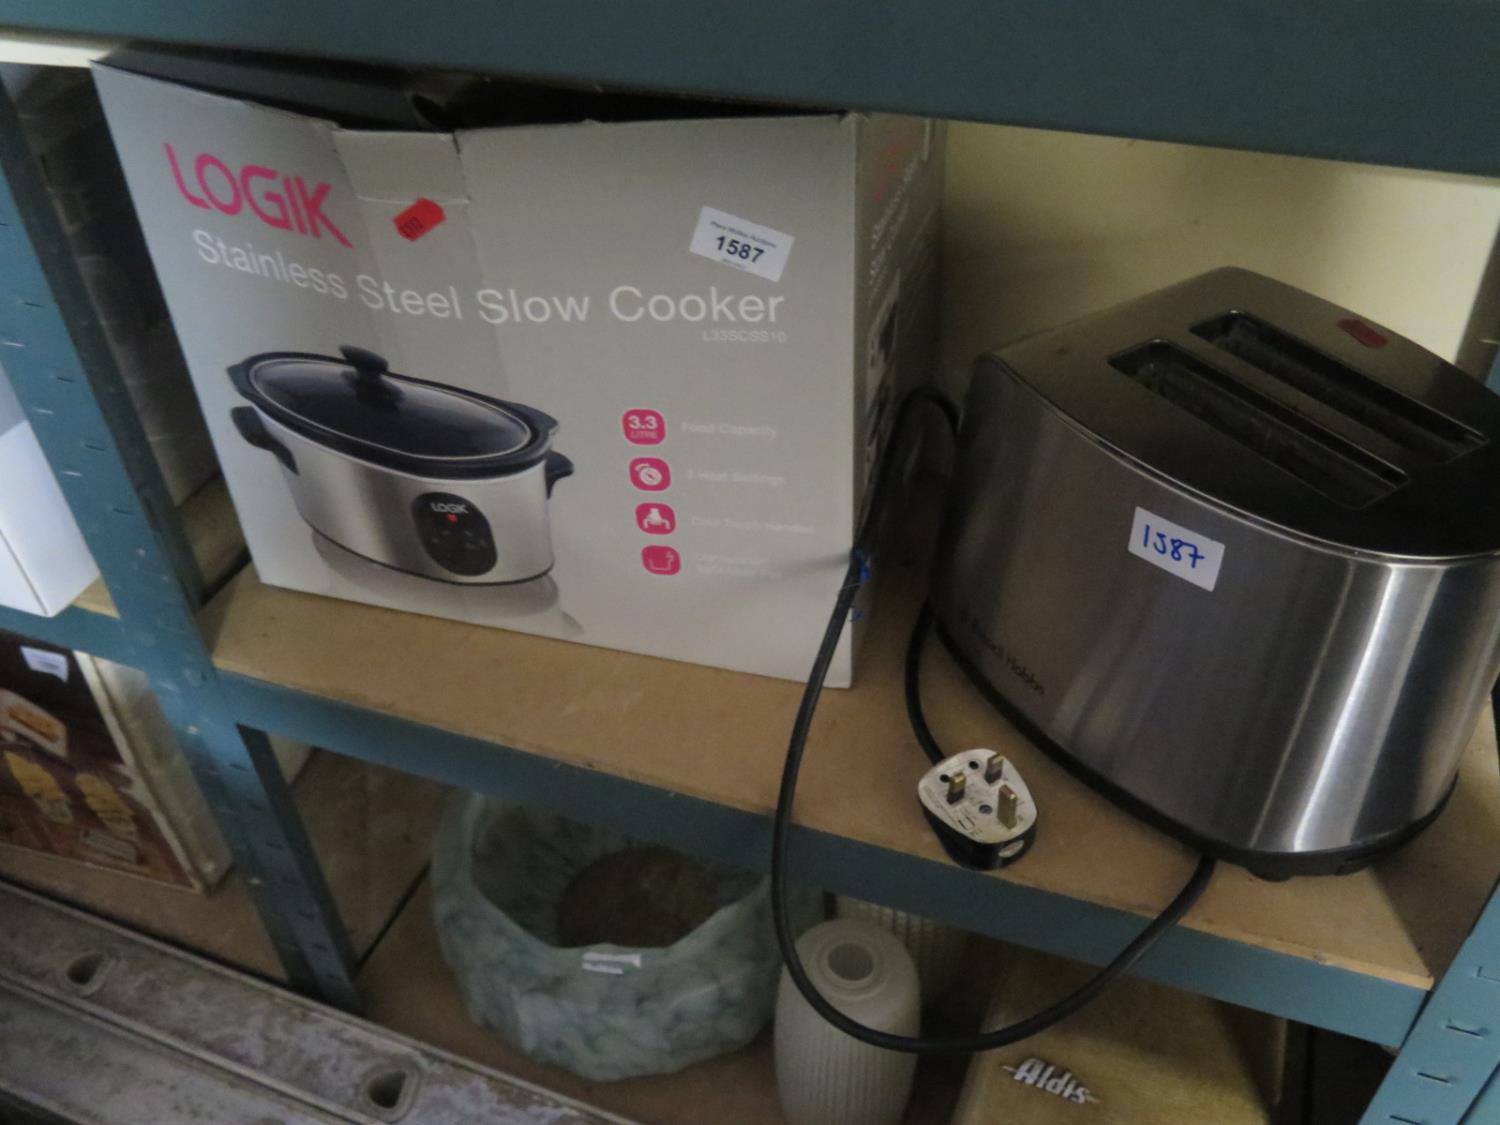 A Toaster, slow cooker and projector